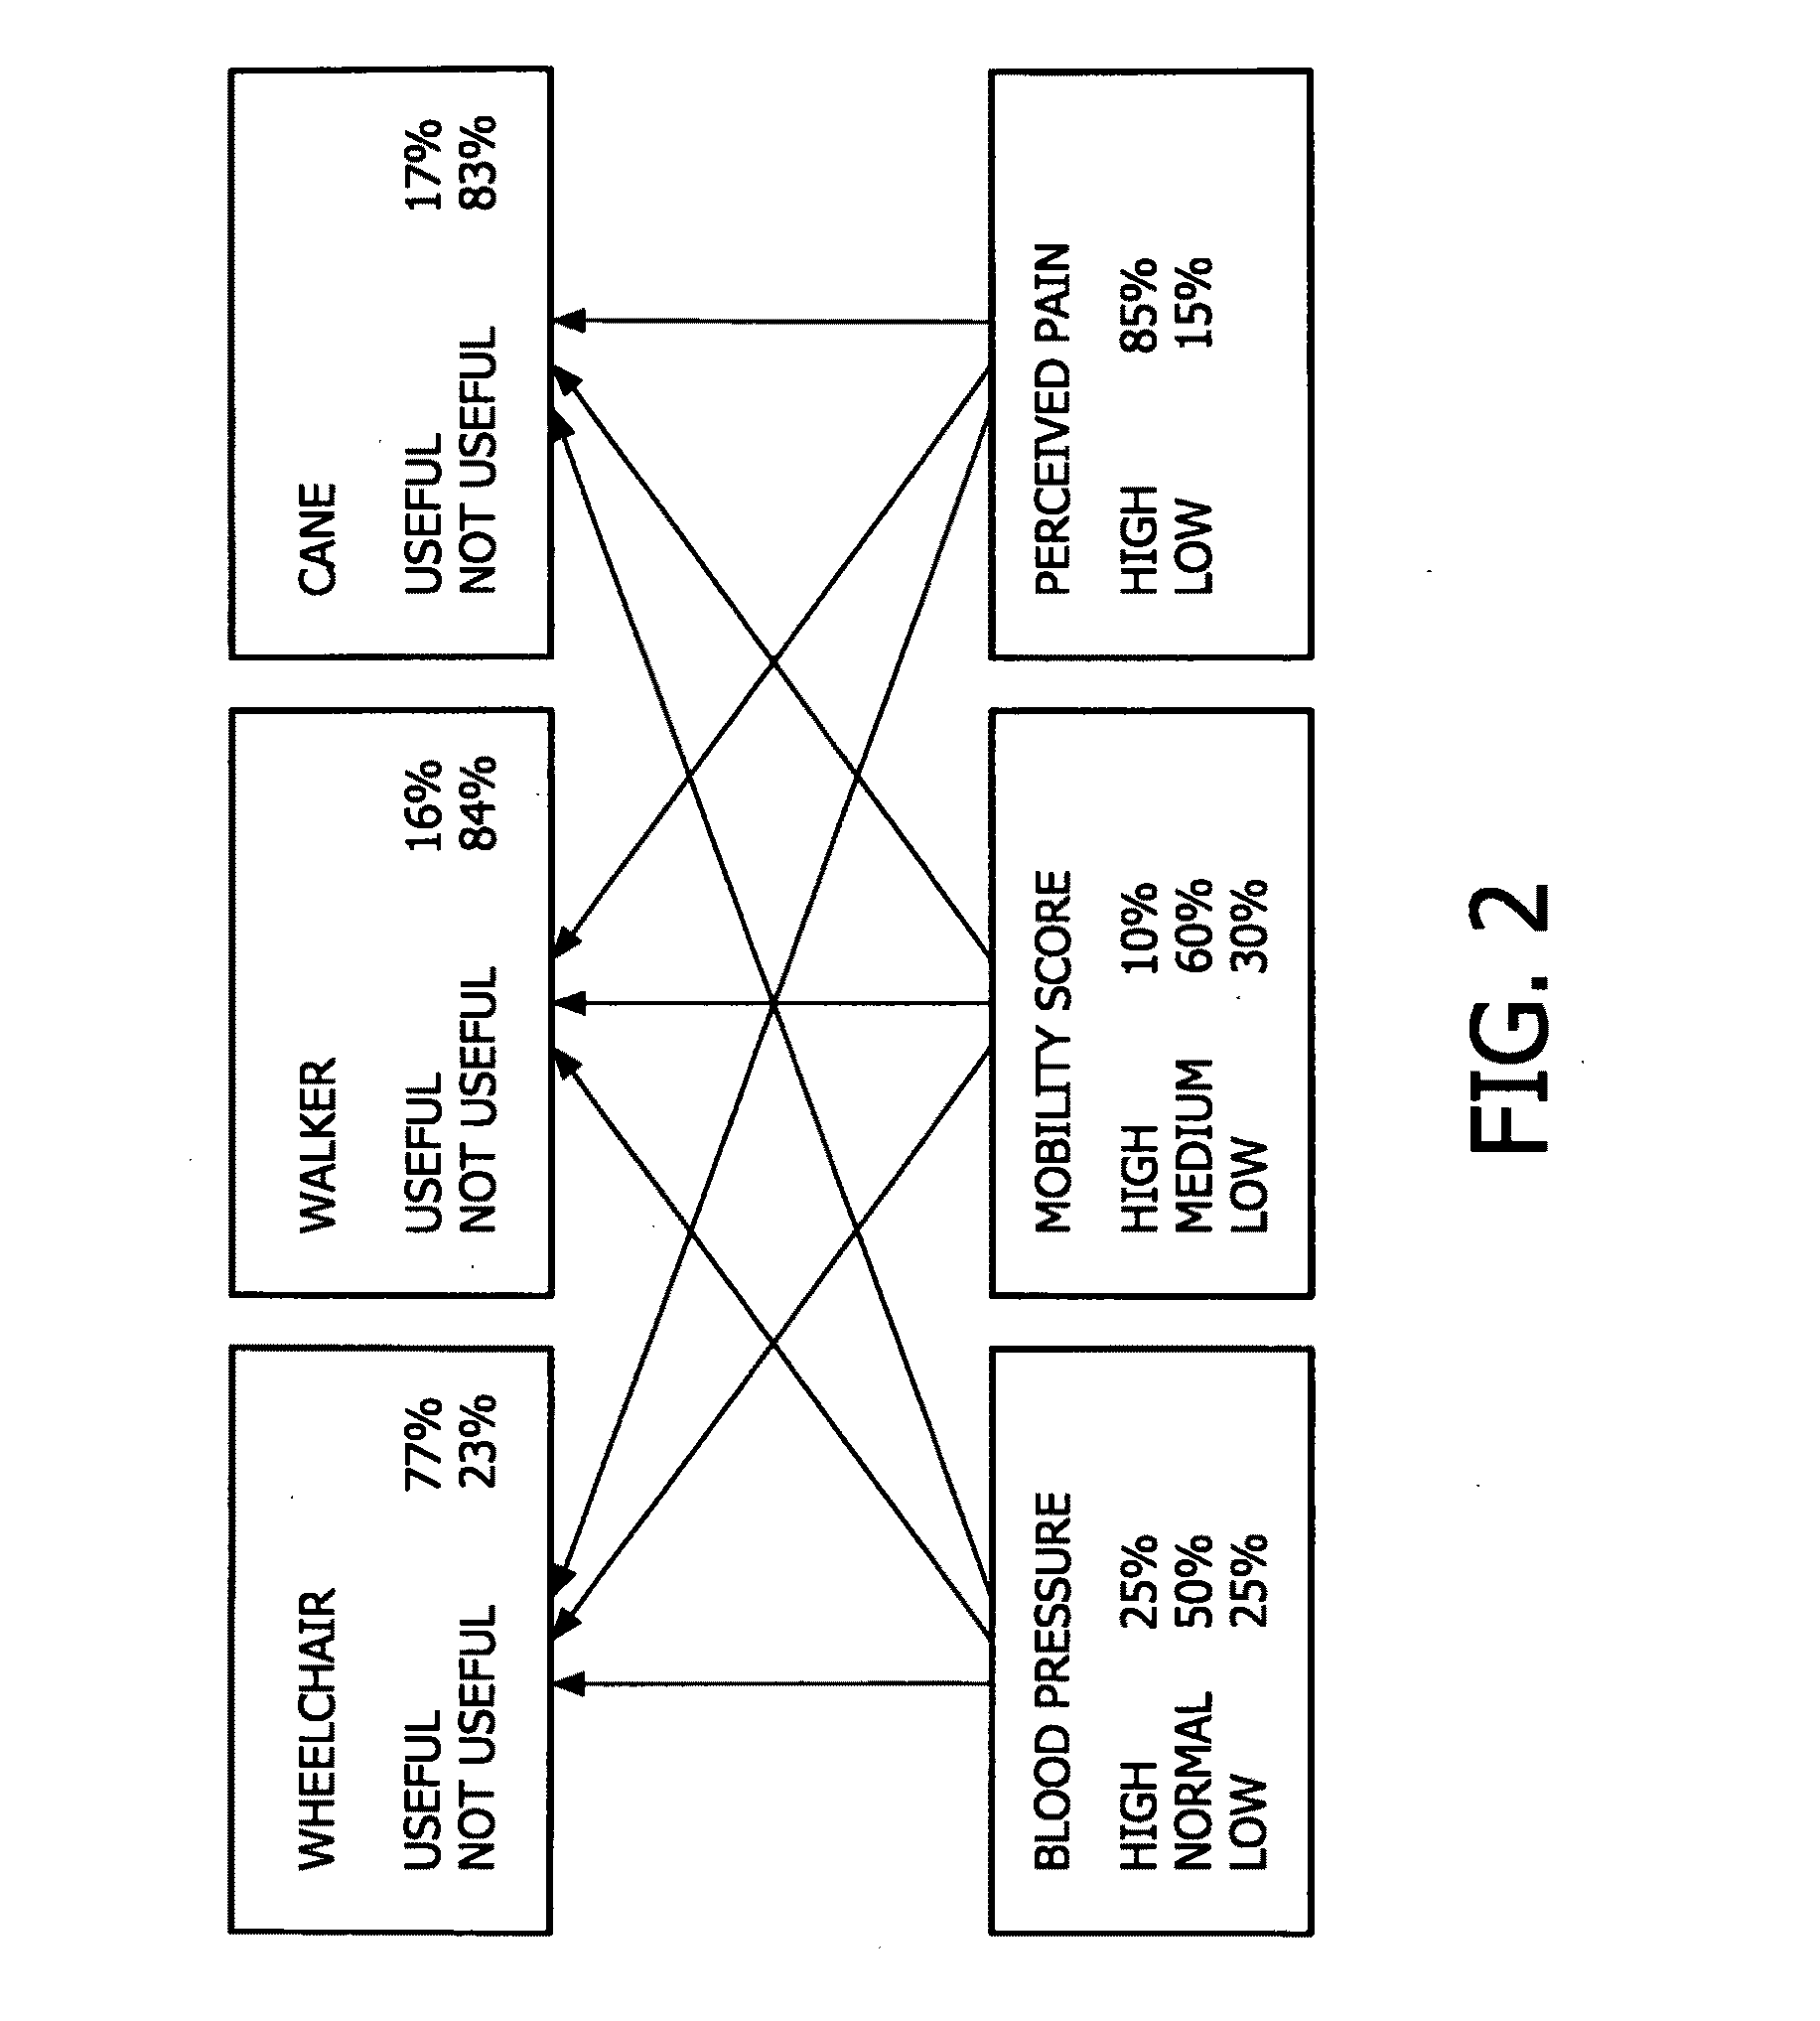 System and method for displaying selected information to a person undertaking exercises